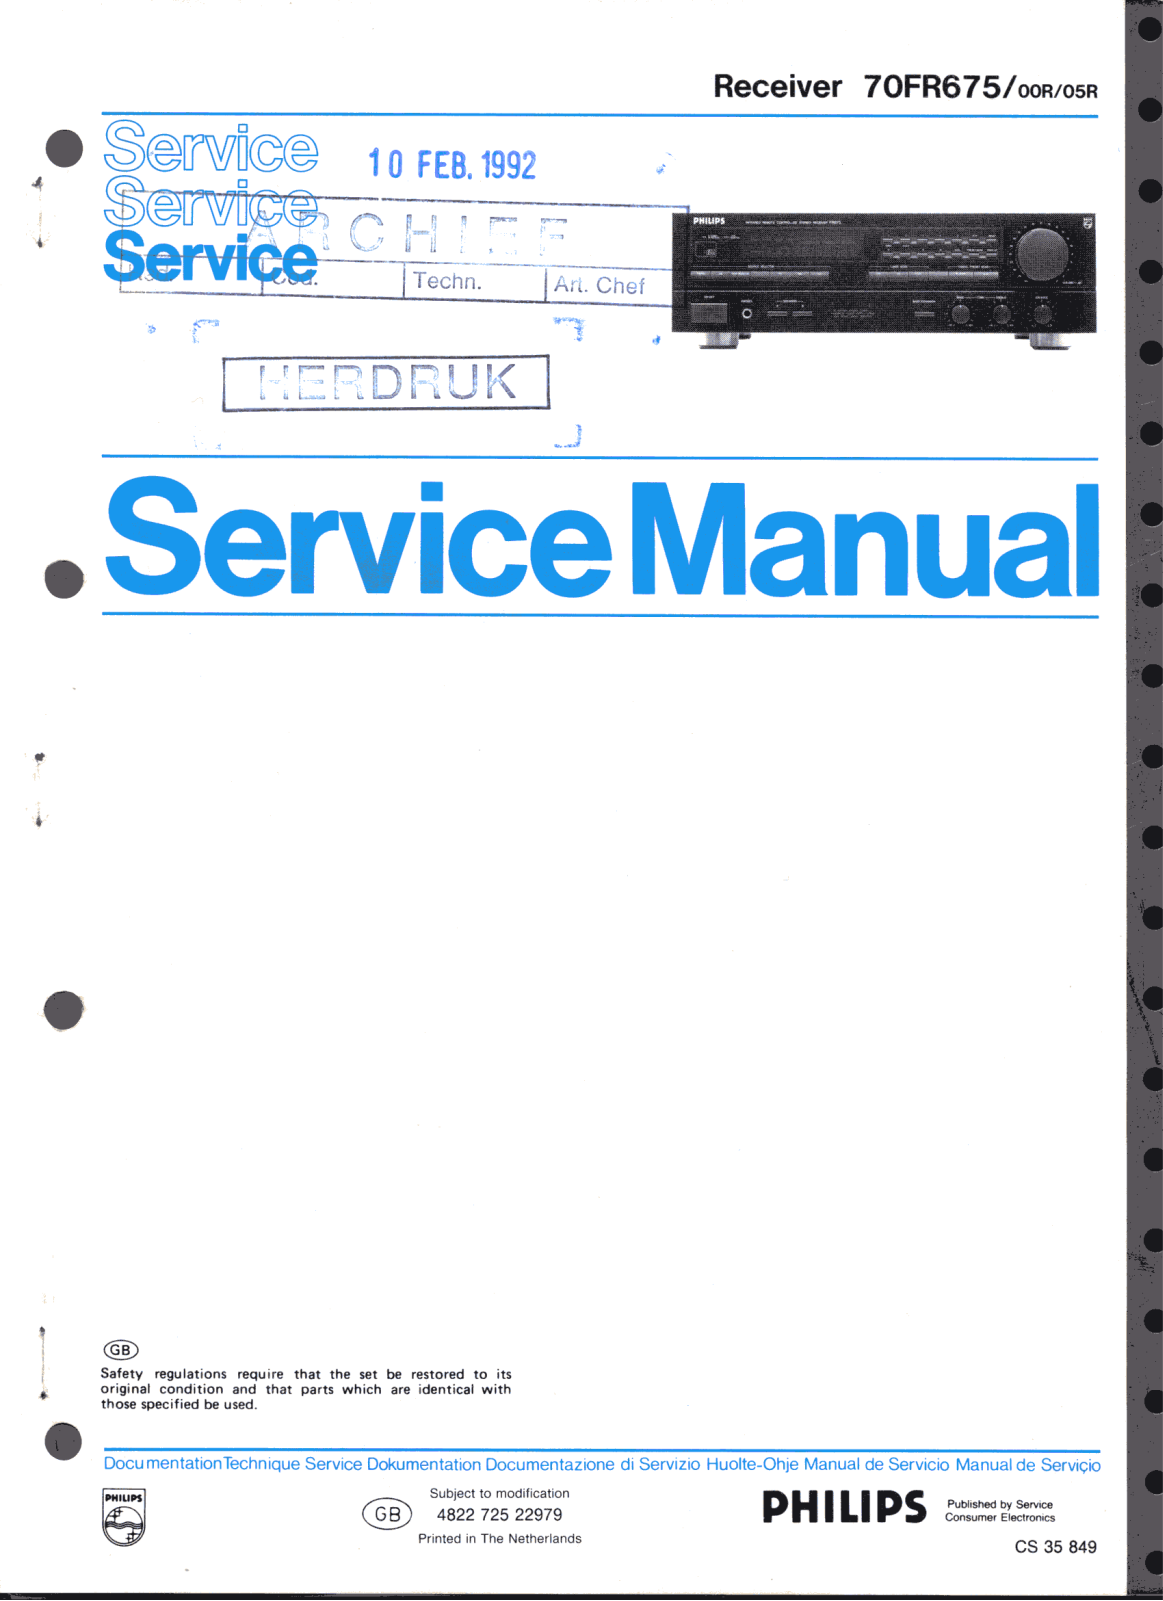 Philips FR-675 Service manual